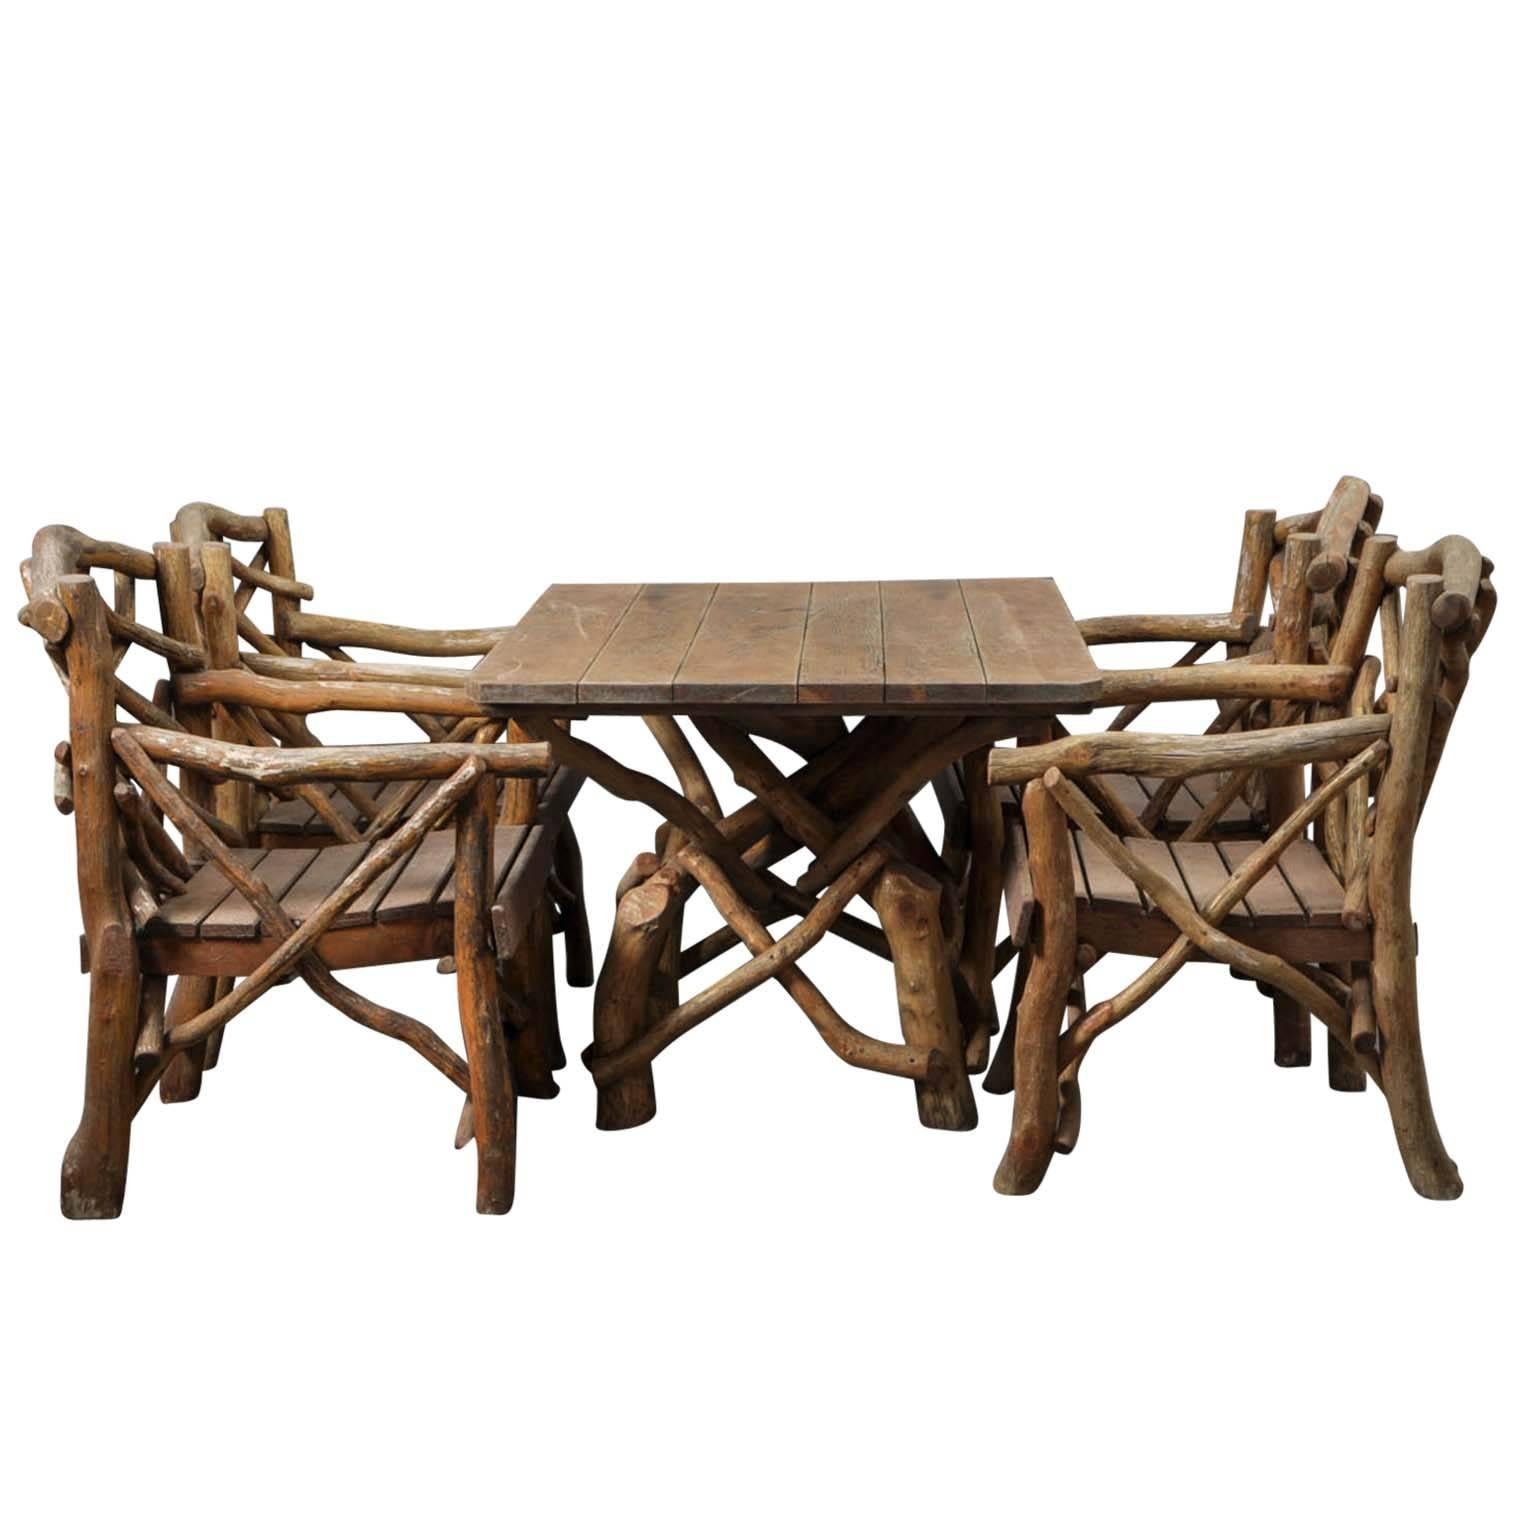 Set of Rustic 1920s-1930s Garden "Twig" Furniture For Sale